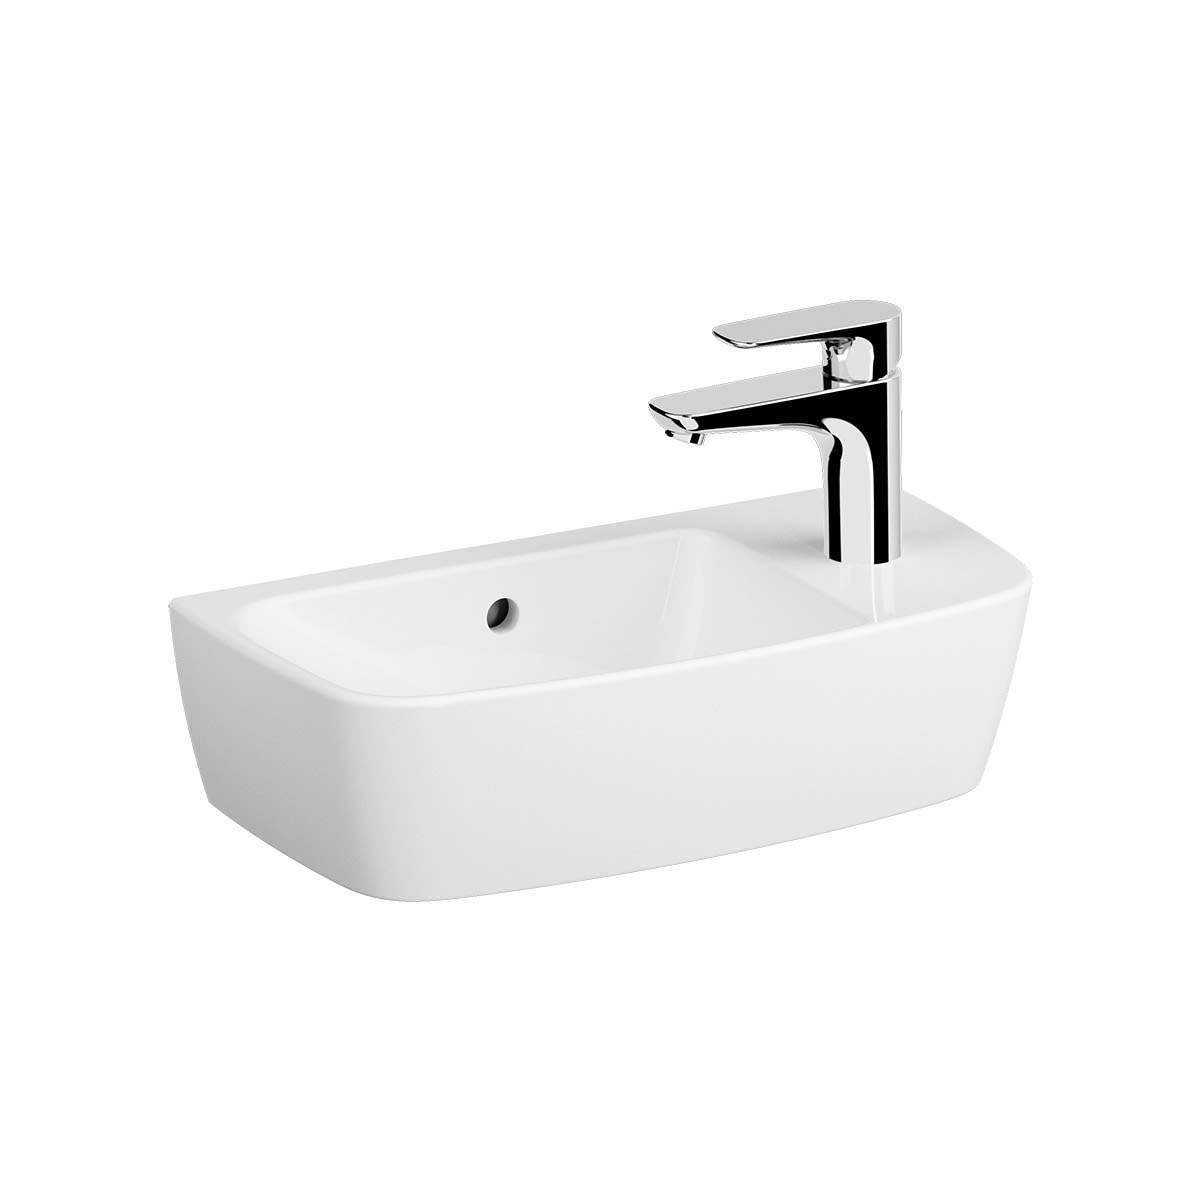 Compact Basin, 50X25 cm, One Tap Hole On Right, With Overflow Hole, For Countertop Use